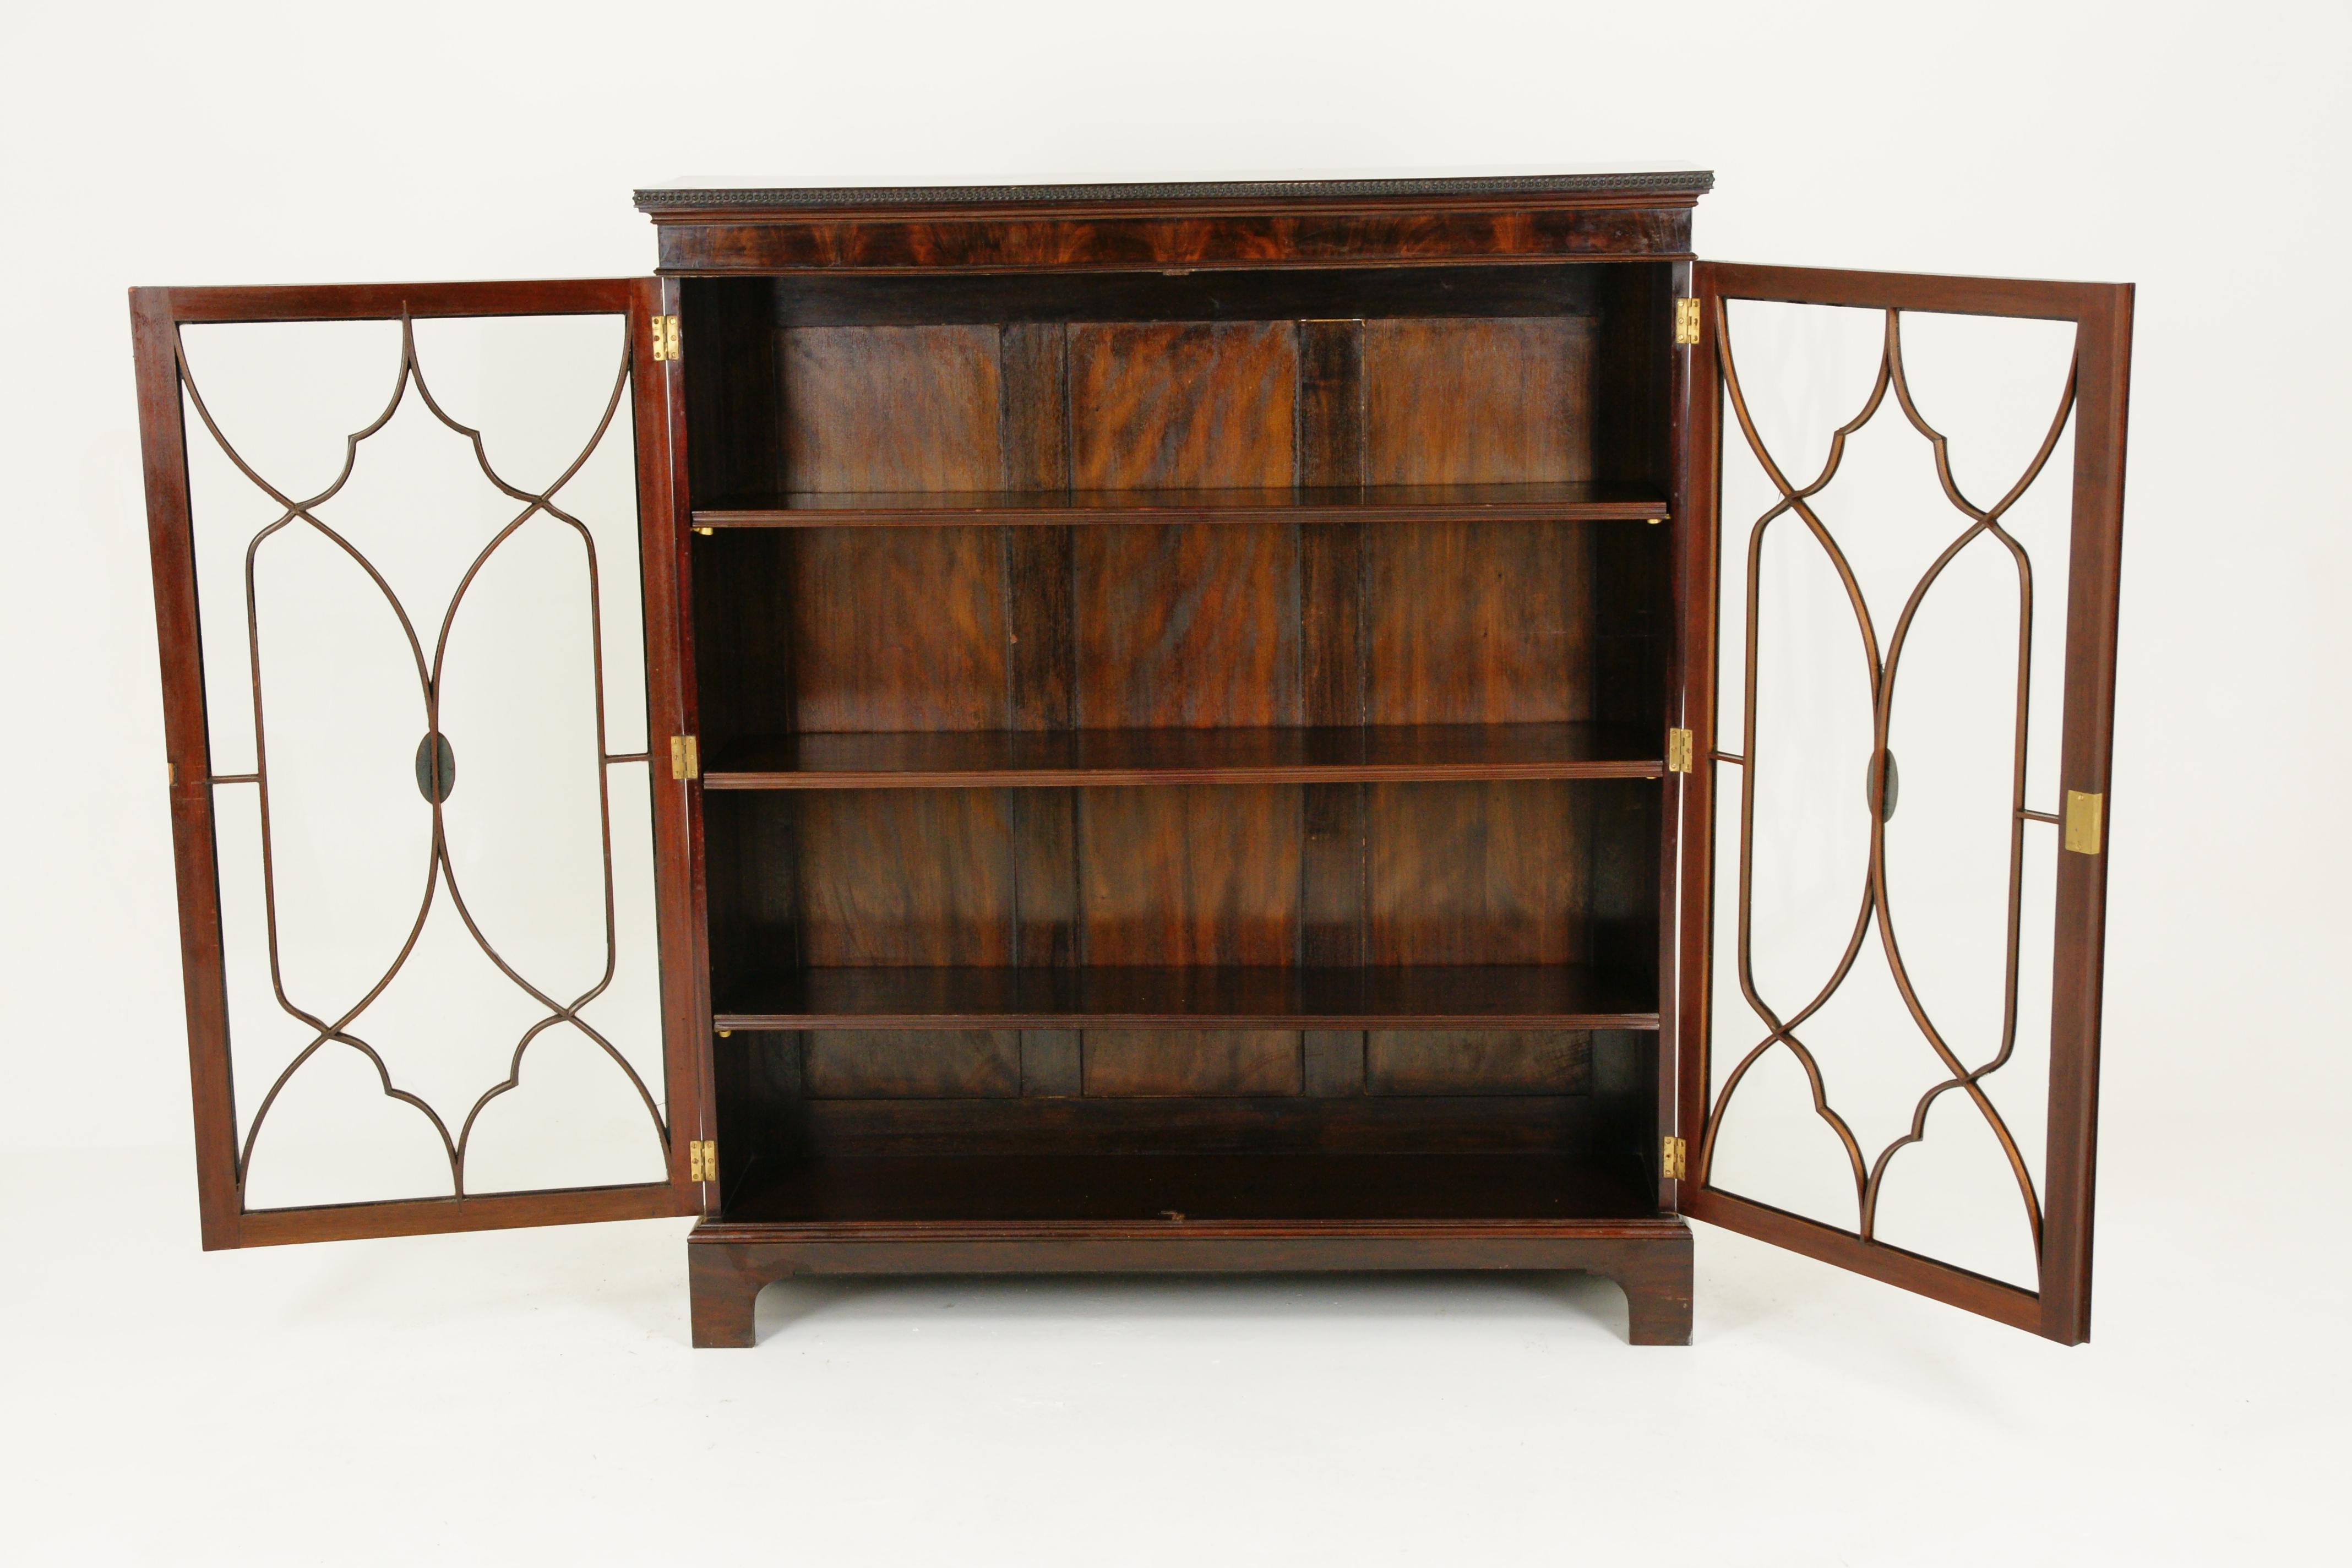 Antique Walnut Bookcase, Display Cabinet, Two Door Bookcase, Scotland, Antique Furniture, B1408A

Scotland
Solid Walnut and Veneers
Original Finish
Dentil Cornice Above
Pair of Astragal Glass Doors
Moulded Beading on Front
Open to Reveal